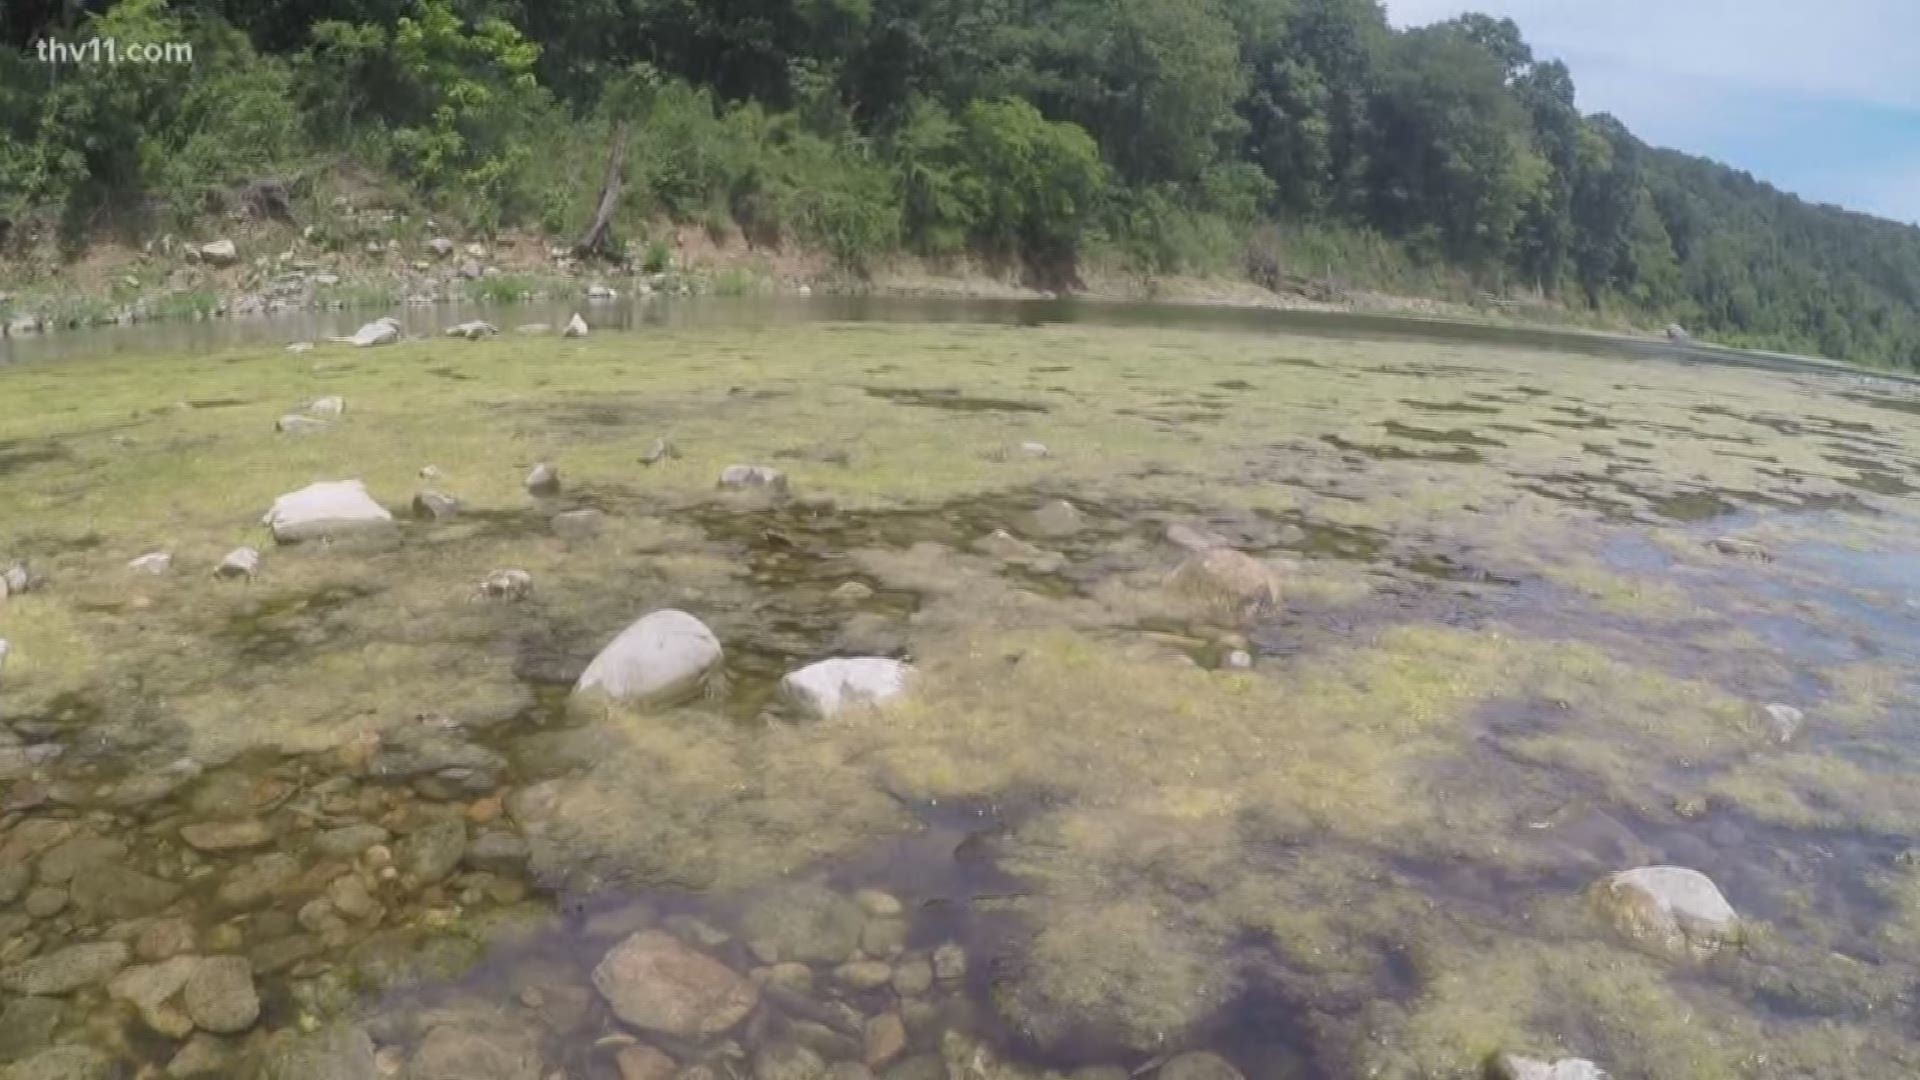 Algae in the Buffalo happens every year, but it's a little ahead of schedule in 2018. Officials say it's fine now and they're keeping an eye on the development.